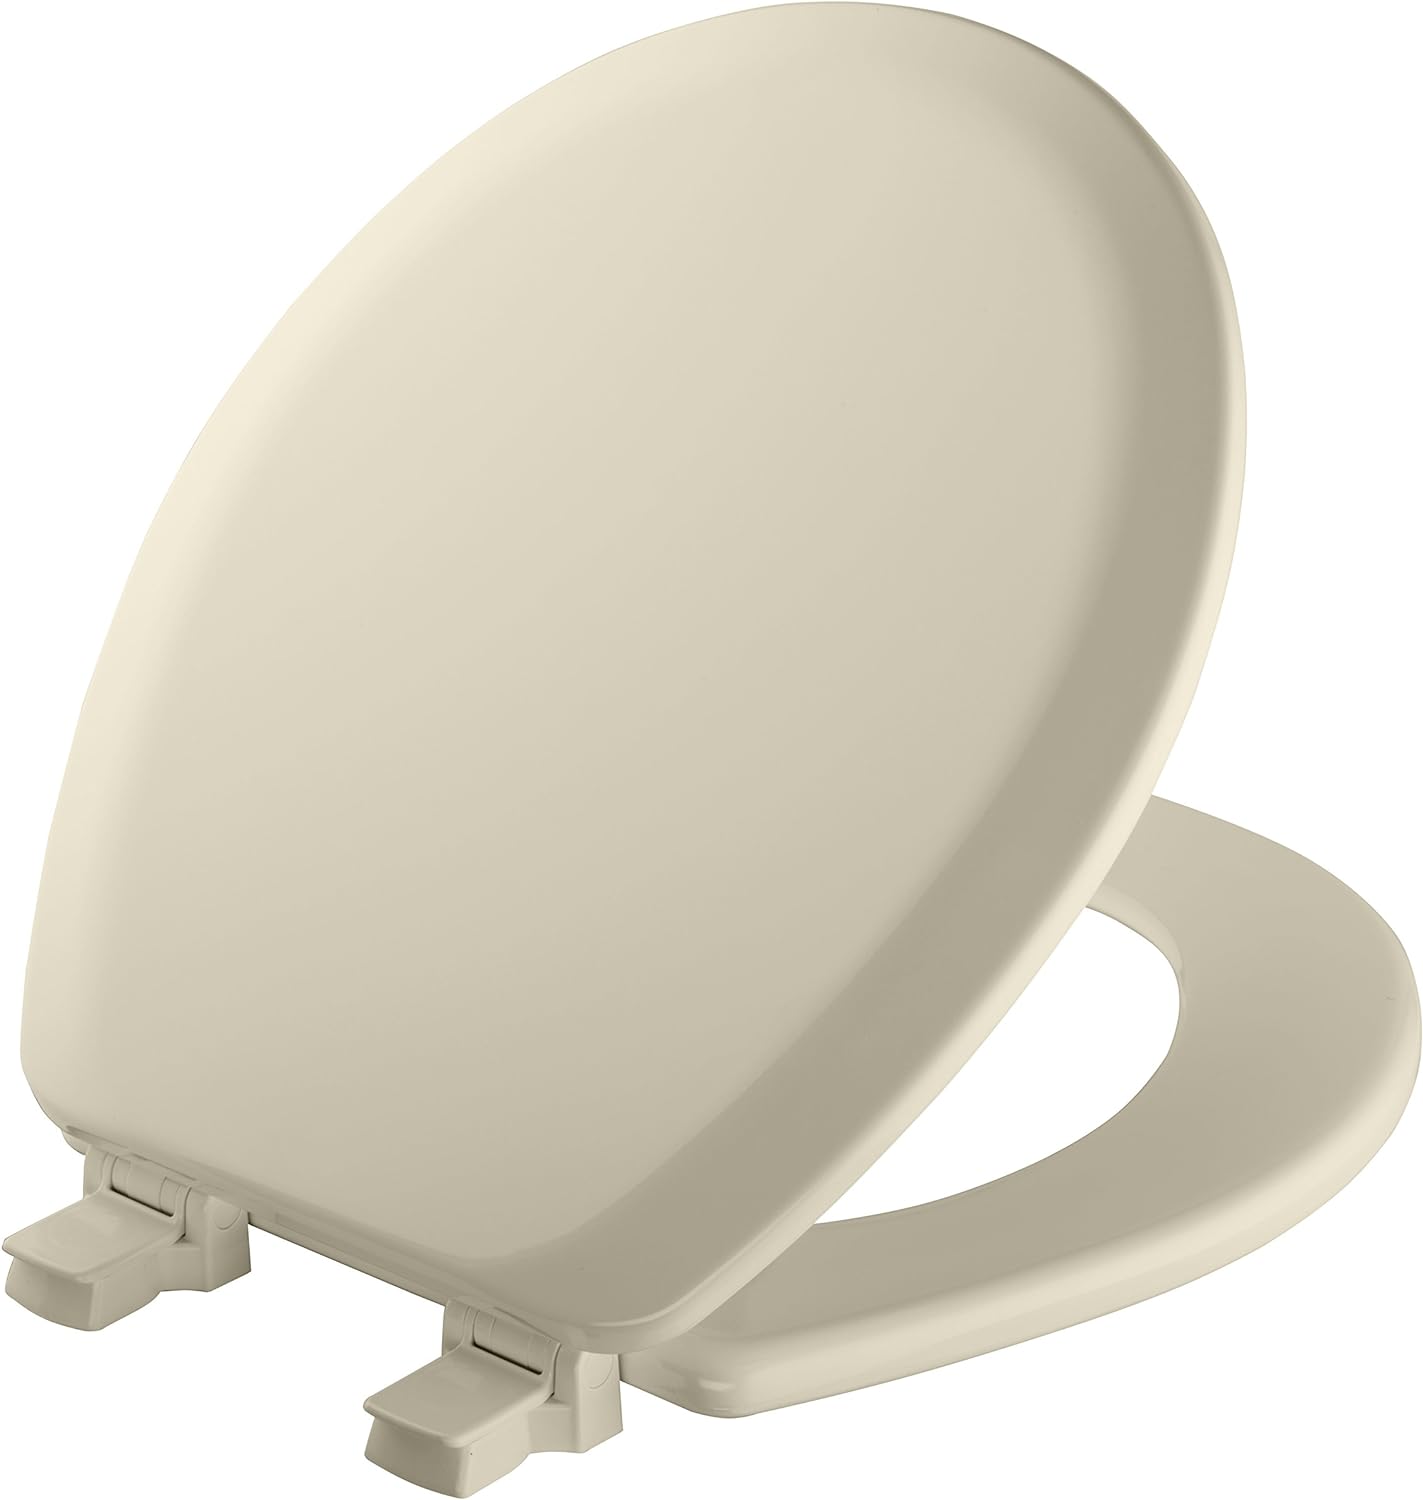 MAYFAIR 41EC 346 Cameron Toilet Seat will Never Loosen and Easily Remove, ROUND, Durable Enameled Wood, Biscuit/Linen